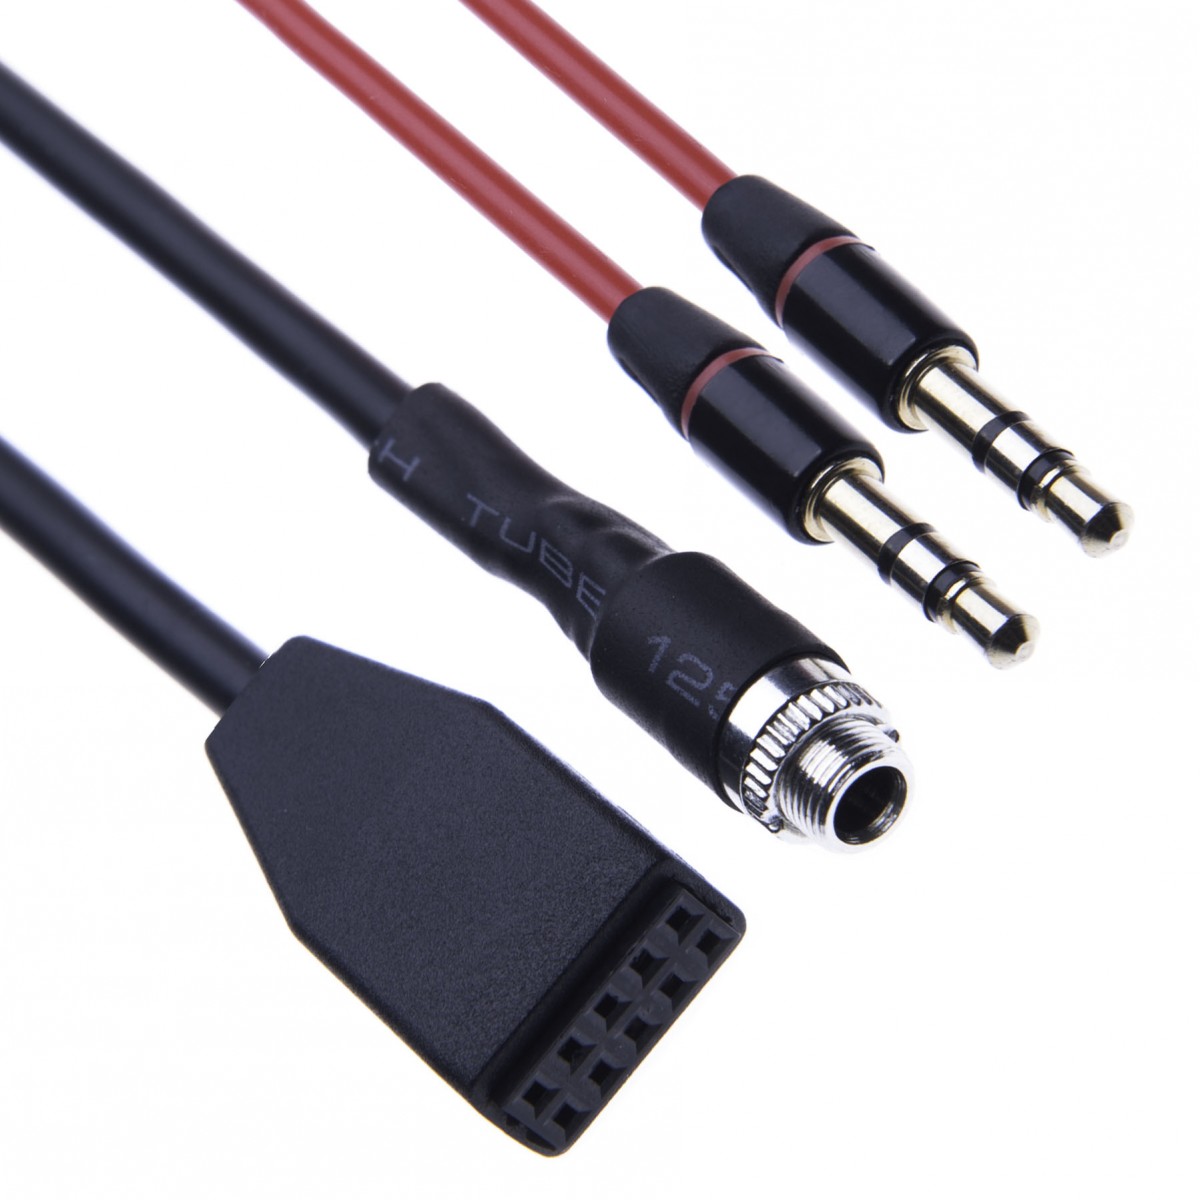 AUX Auxiliary Audio Input Kit Iphone Ipod Adapter Cable for BMW Z4 X3 MiniCooper